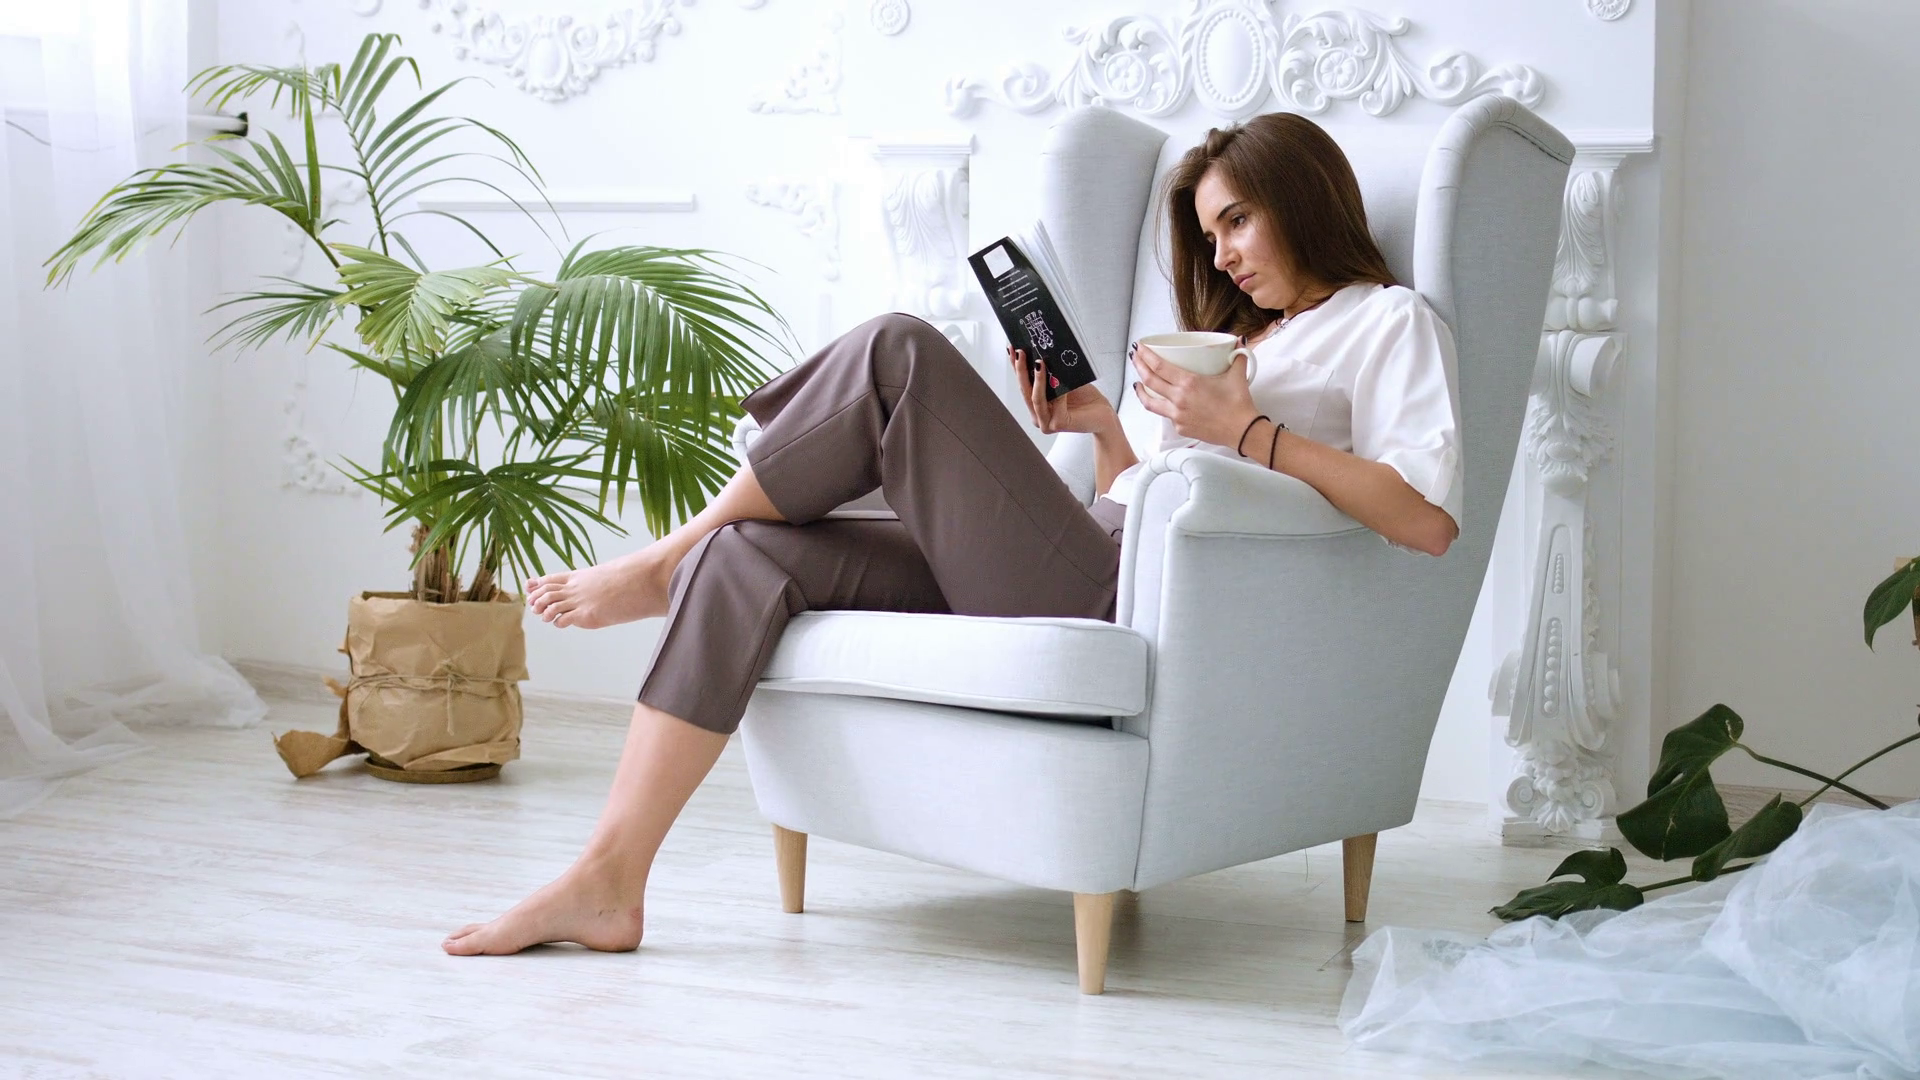 videoblocks-pretty-girl-drinking-coffee-or-tea-and-relaxing-in-chair-reading-a-book_rw5ucyr-b_thumbnail-full01